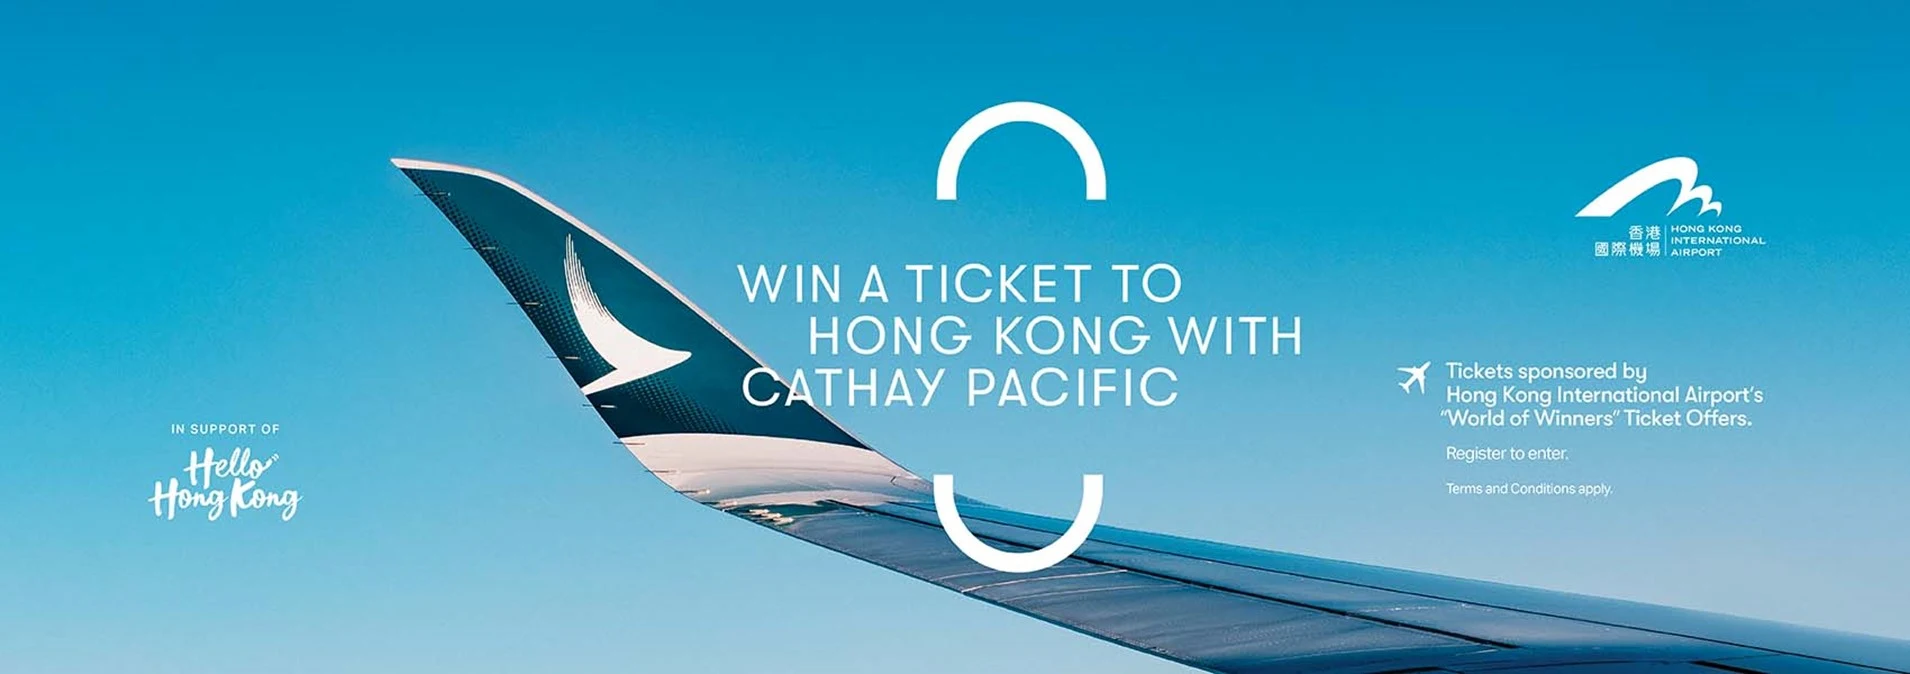 win a ticket to hong kong with cathay pacific promo